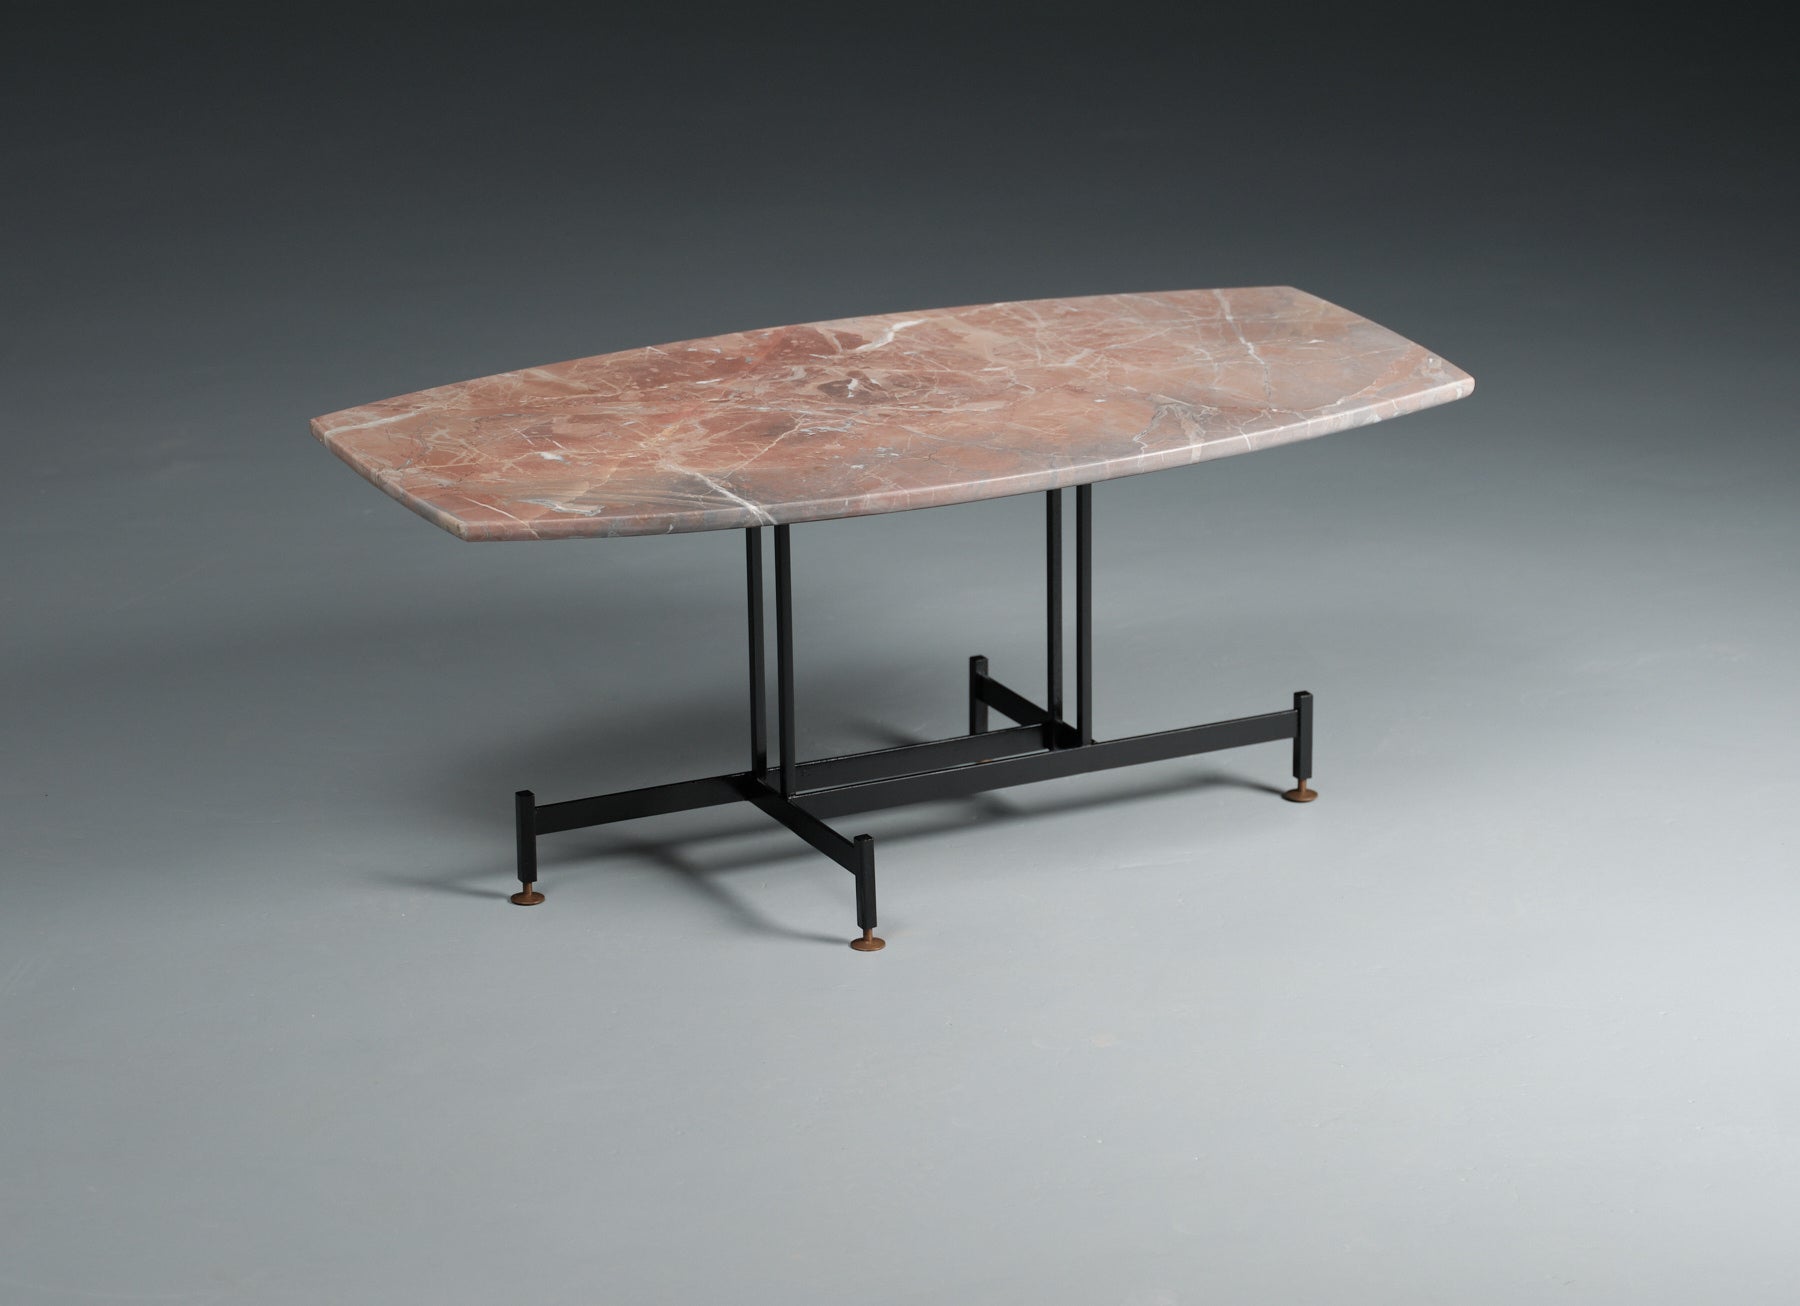 This midcentury vintage coffee table is a true testament to timeless design. Its standout feature is the thick marble tabletop, showcasing various shades of reddish-gray with elegant white veining. The marble exudes a unique character that adds a